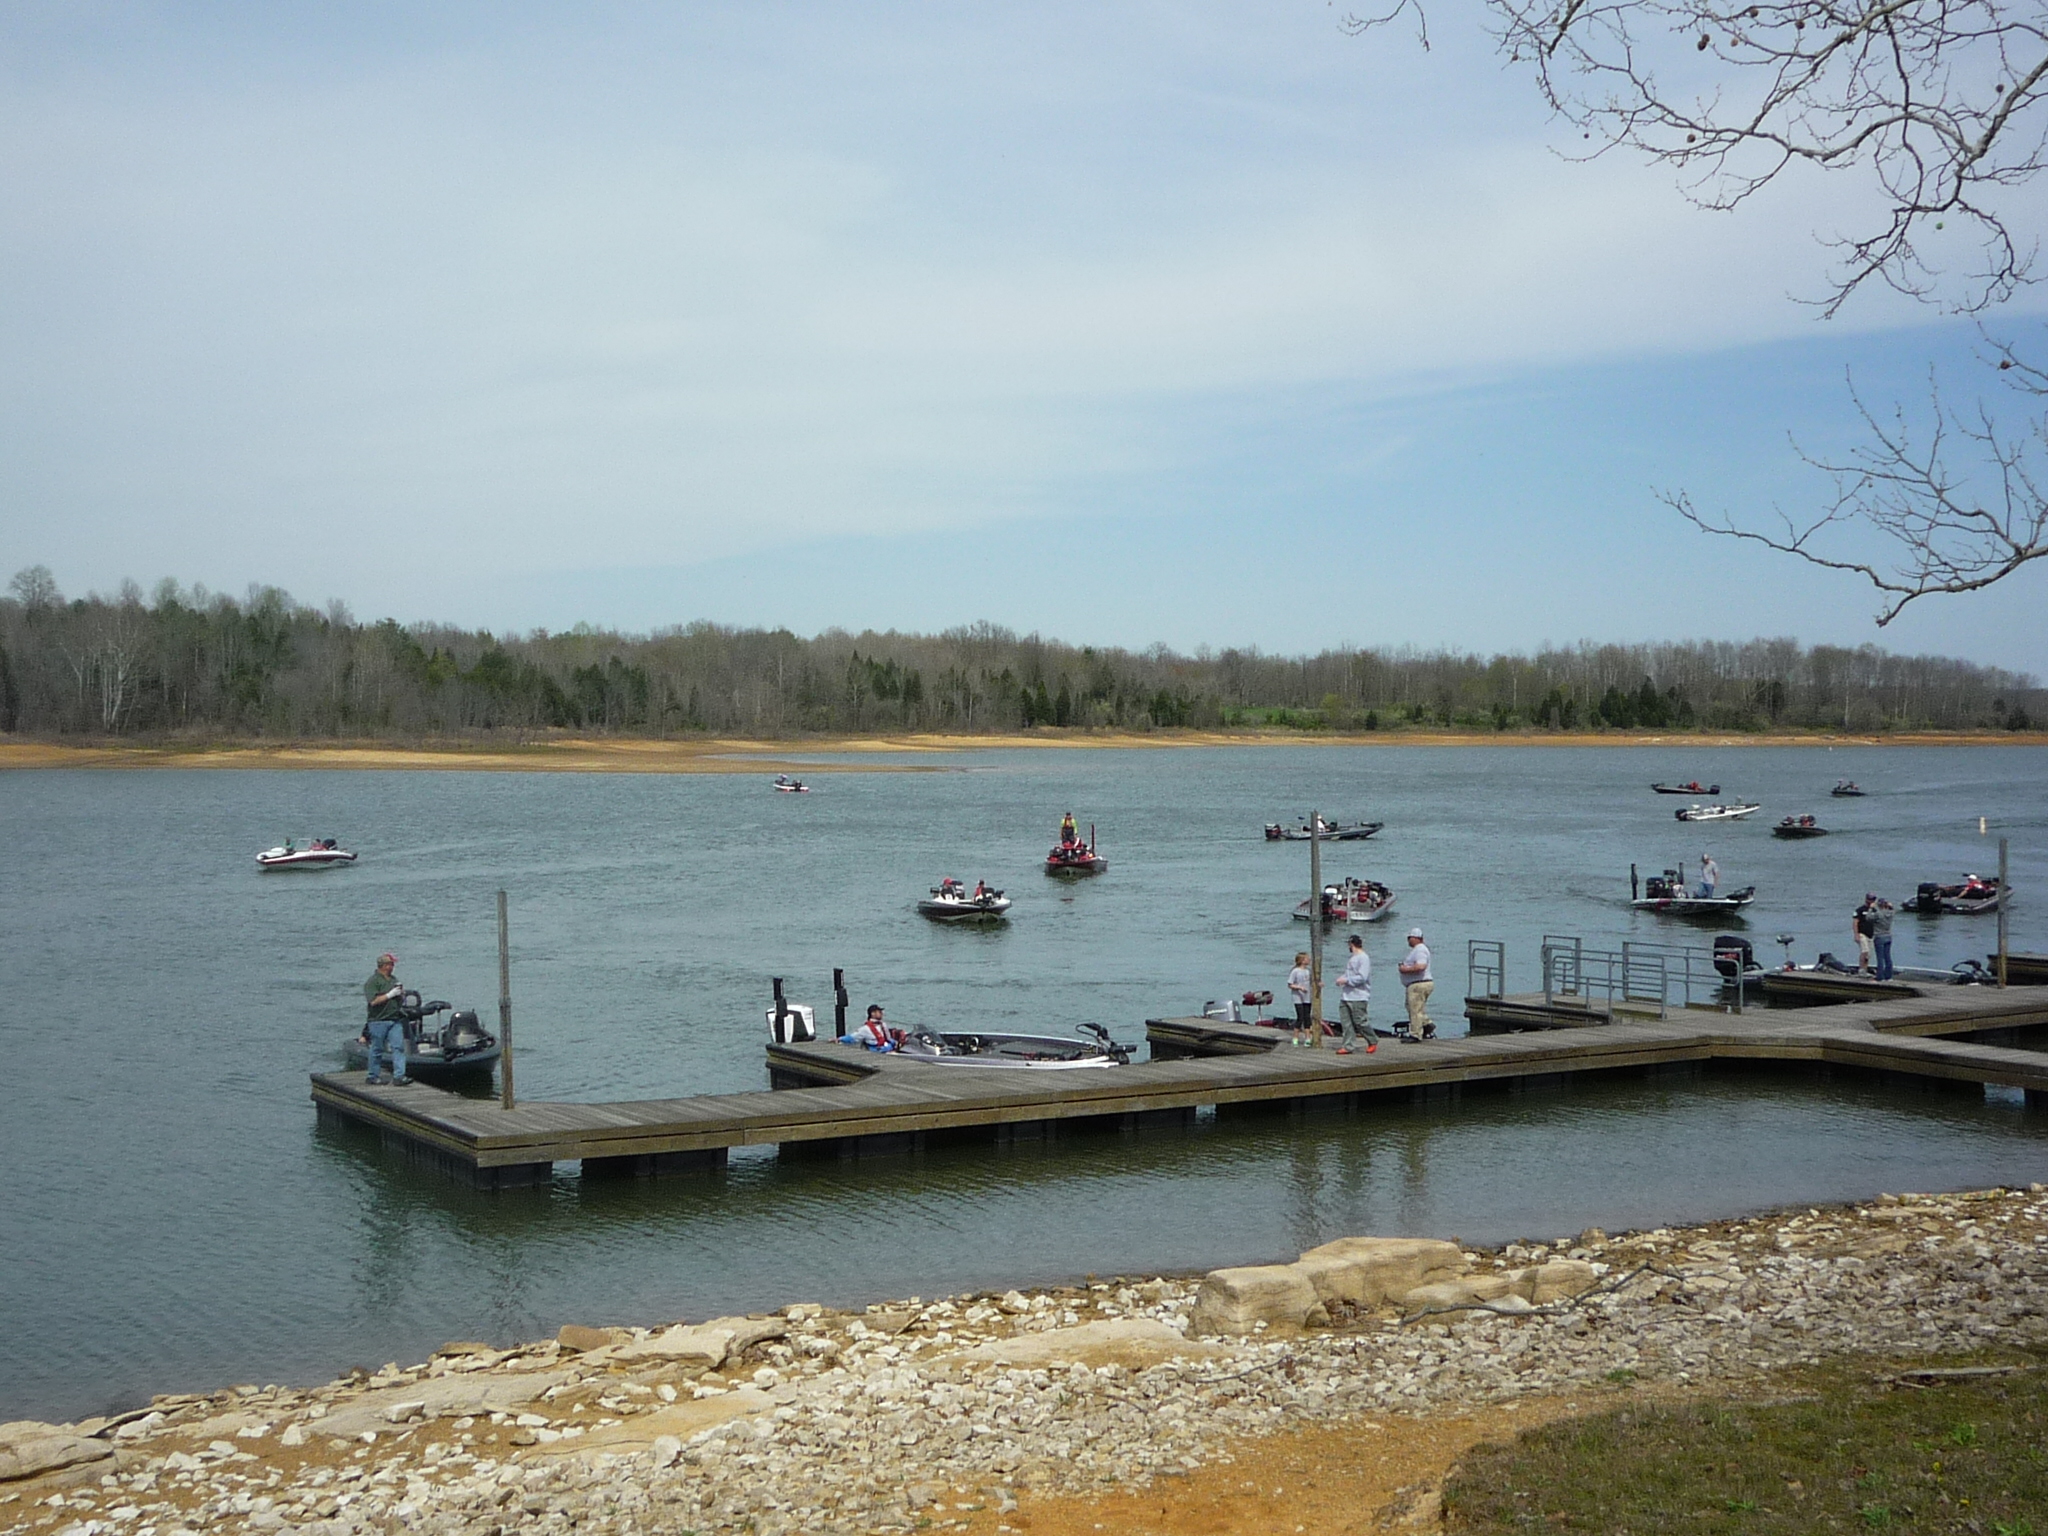 Picture of the lake the bass tournament is held at.